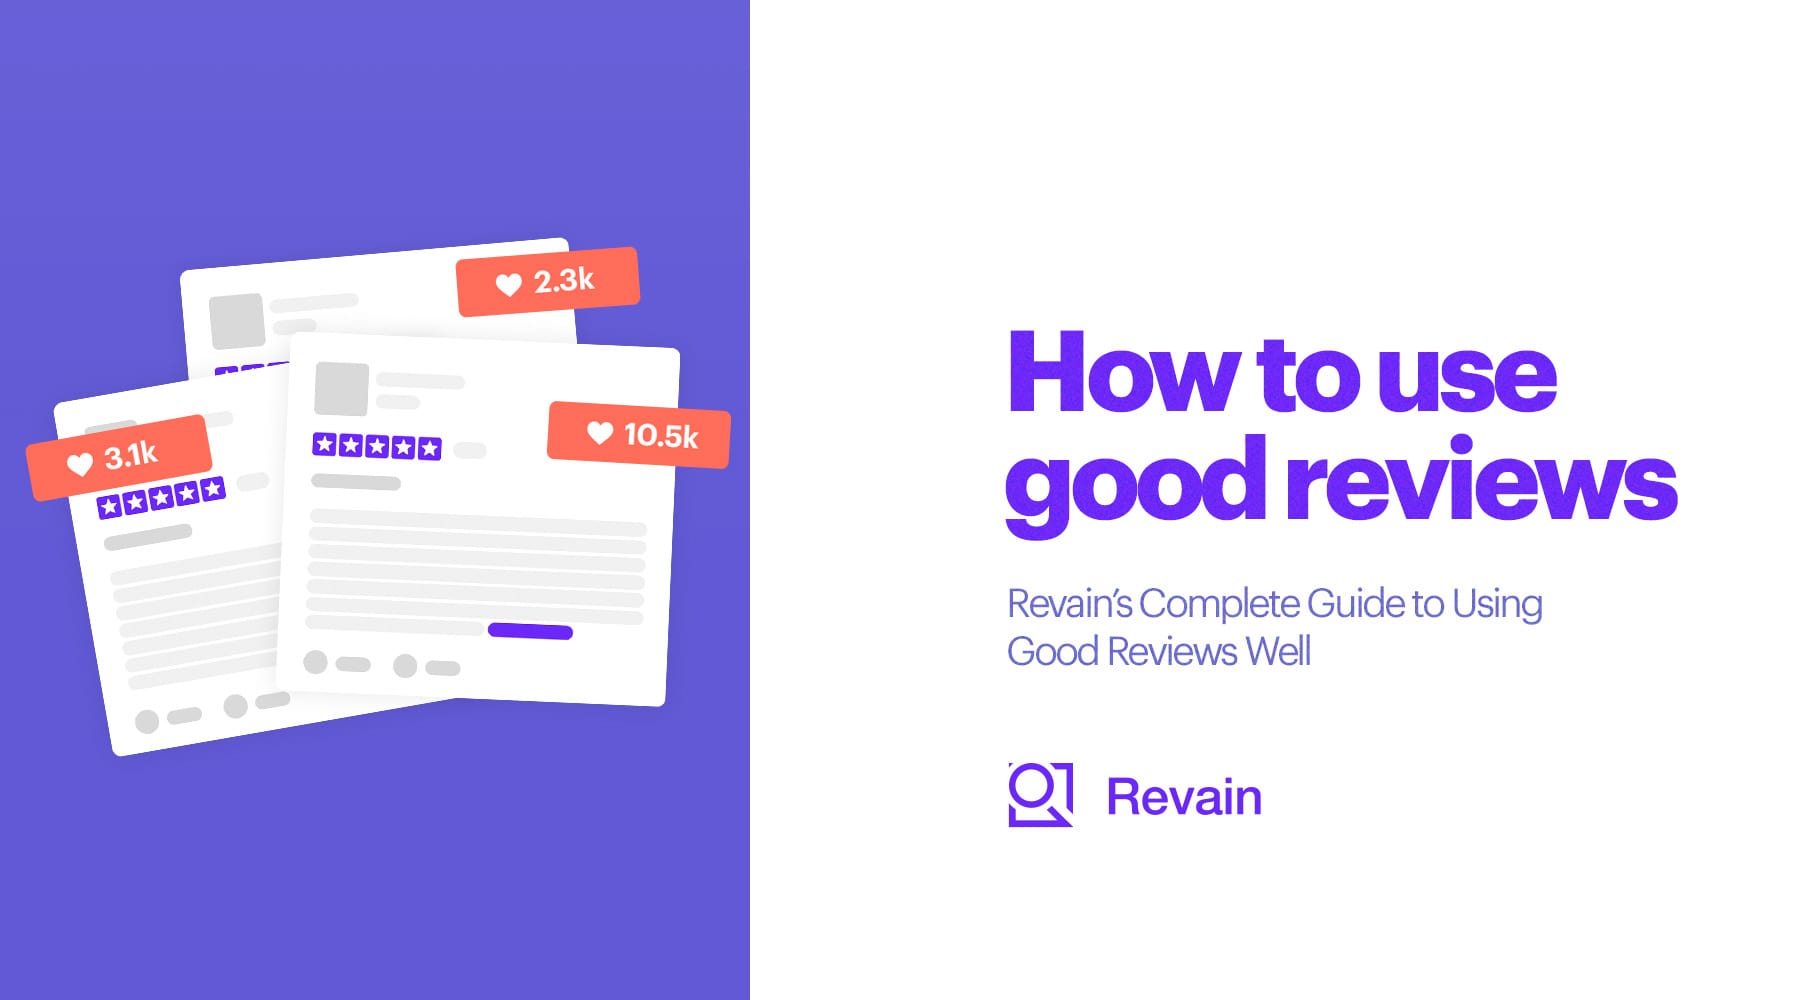 Revain’s Complete Guide to Using Reviews Well